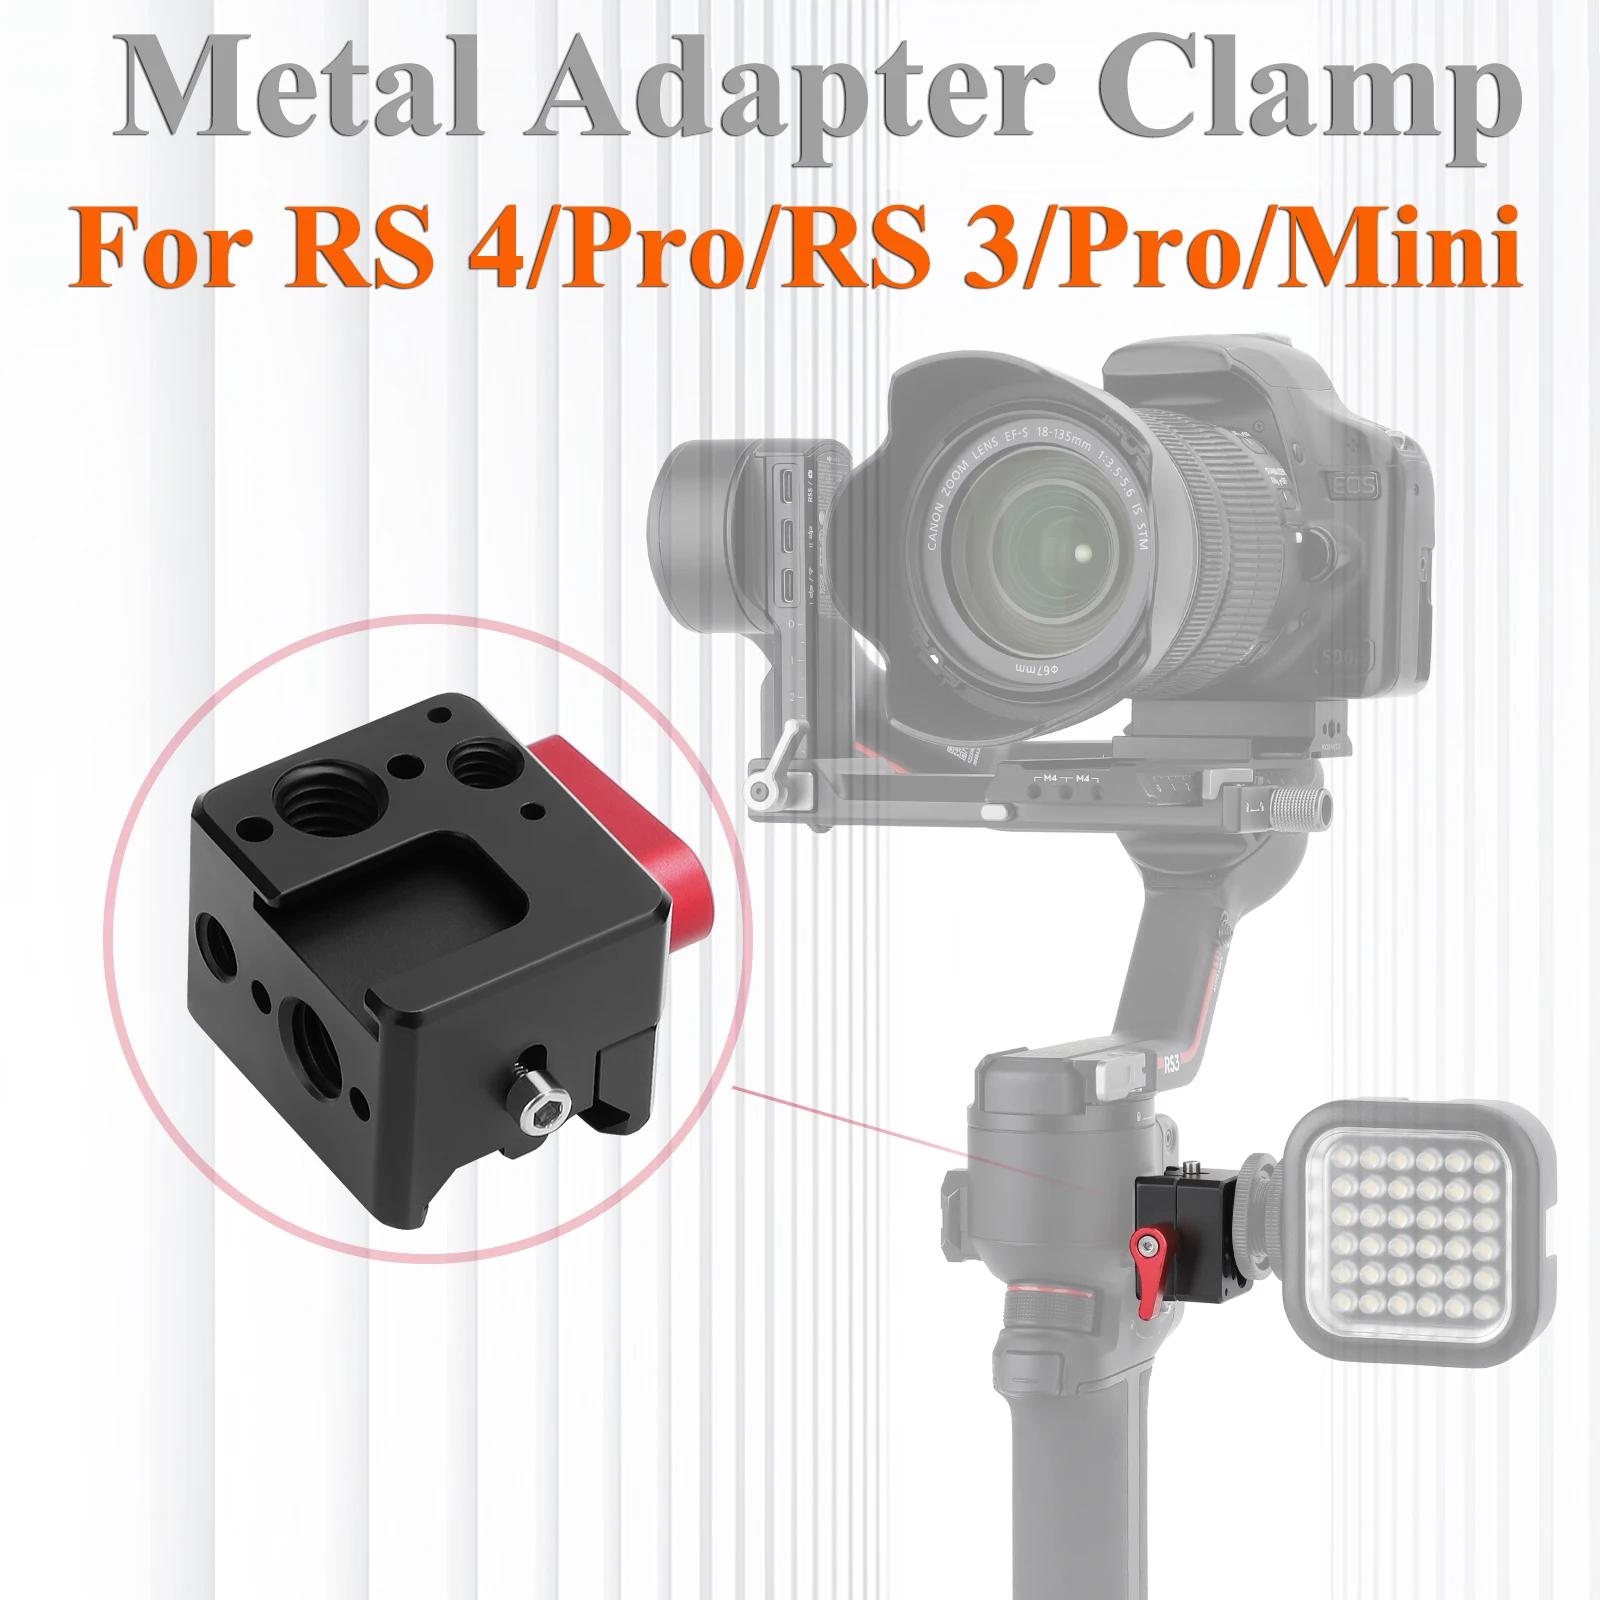 DJI RS 4/RS 4 ο ݼ  Ŭ, δ º, ˷̴ ձ Ʈ Ȯ Ŭ, DJI RS 3/RS 3 ο ׼